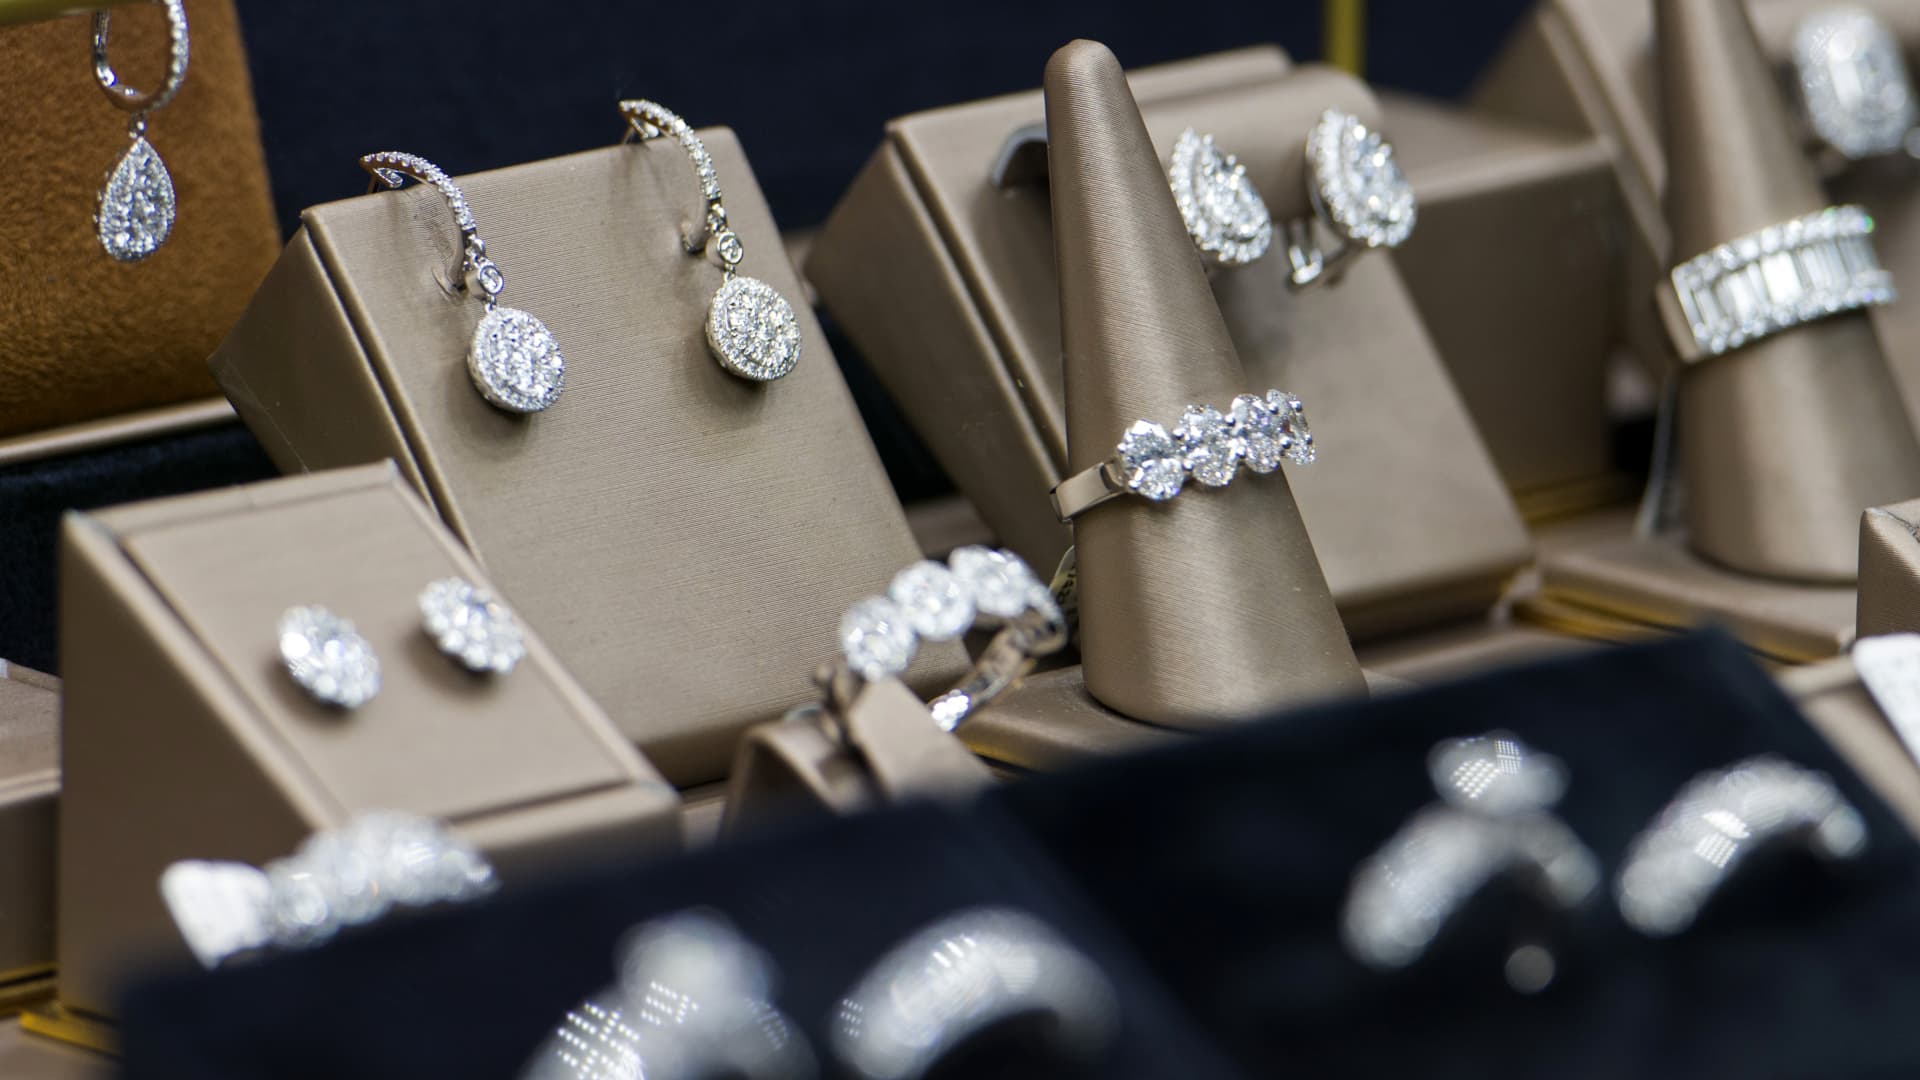 Russian diamonds could soon be sanctioned — potentially disrupting the global jewelry market